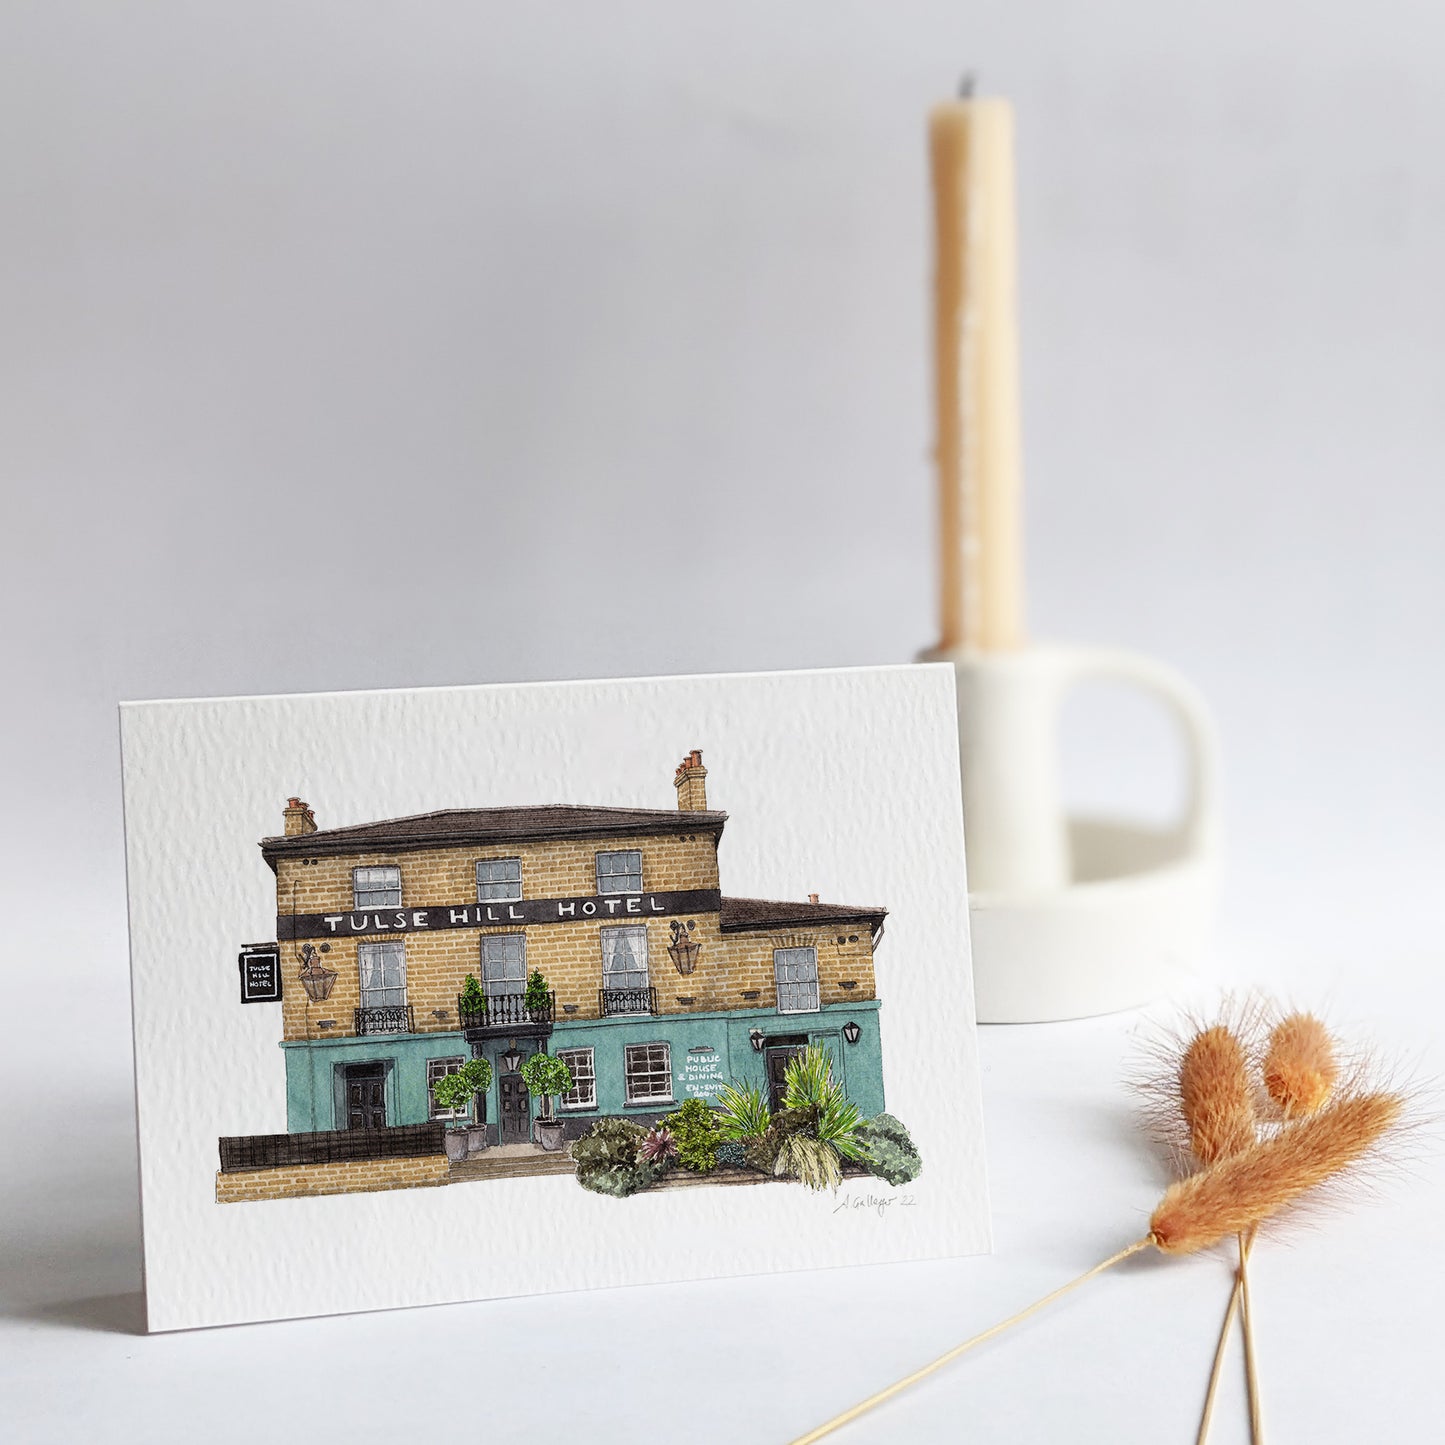 Tulse Hill - Tulse Hill Hotel pub - Greeting card with envelope